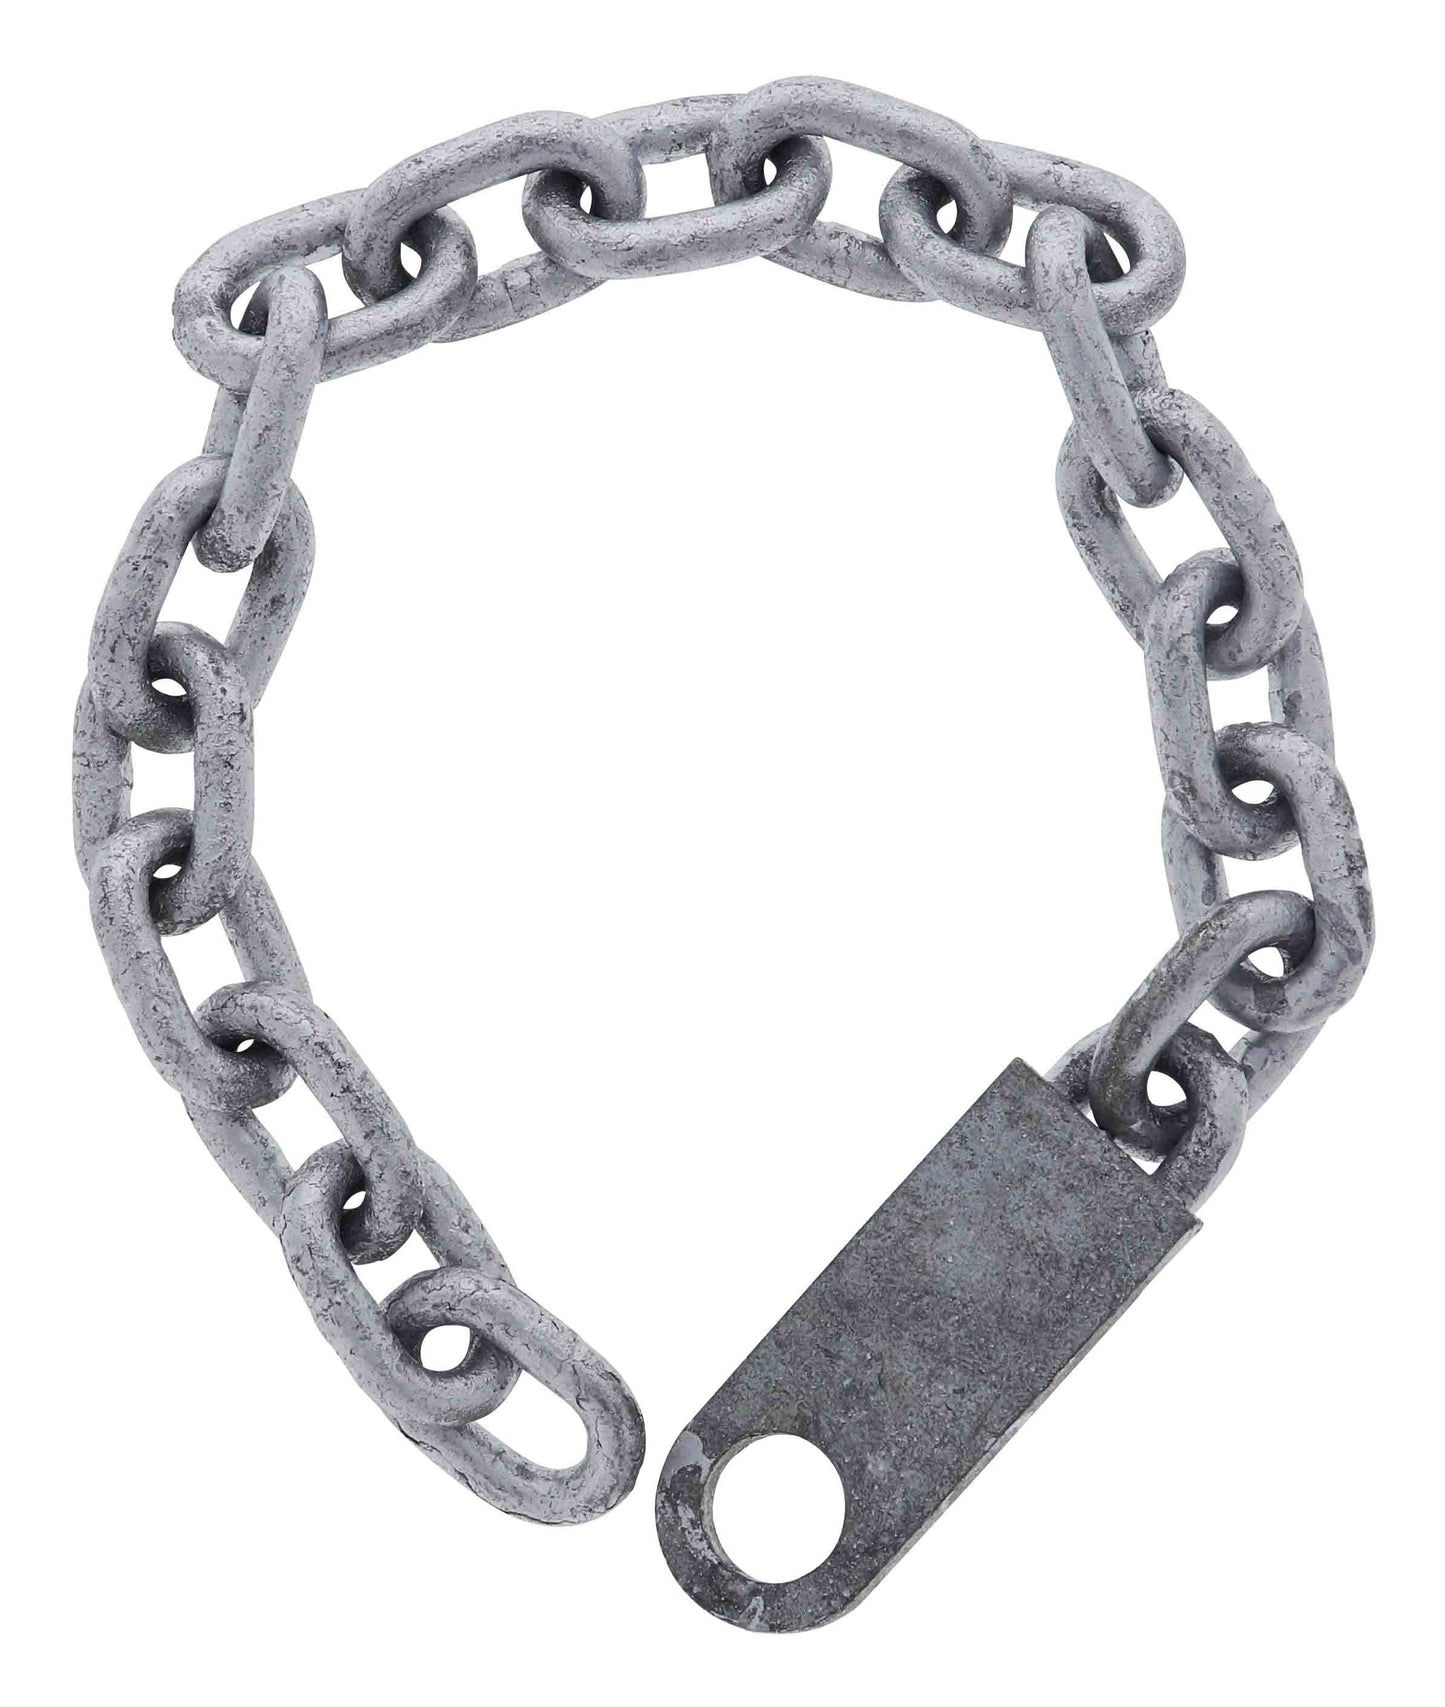 Carbine multi padlock solution spare galvanised chain and end piece